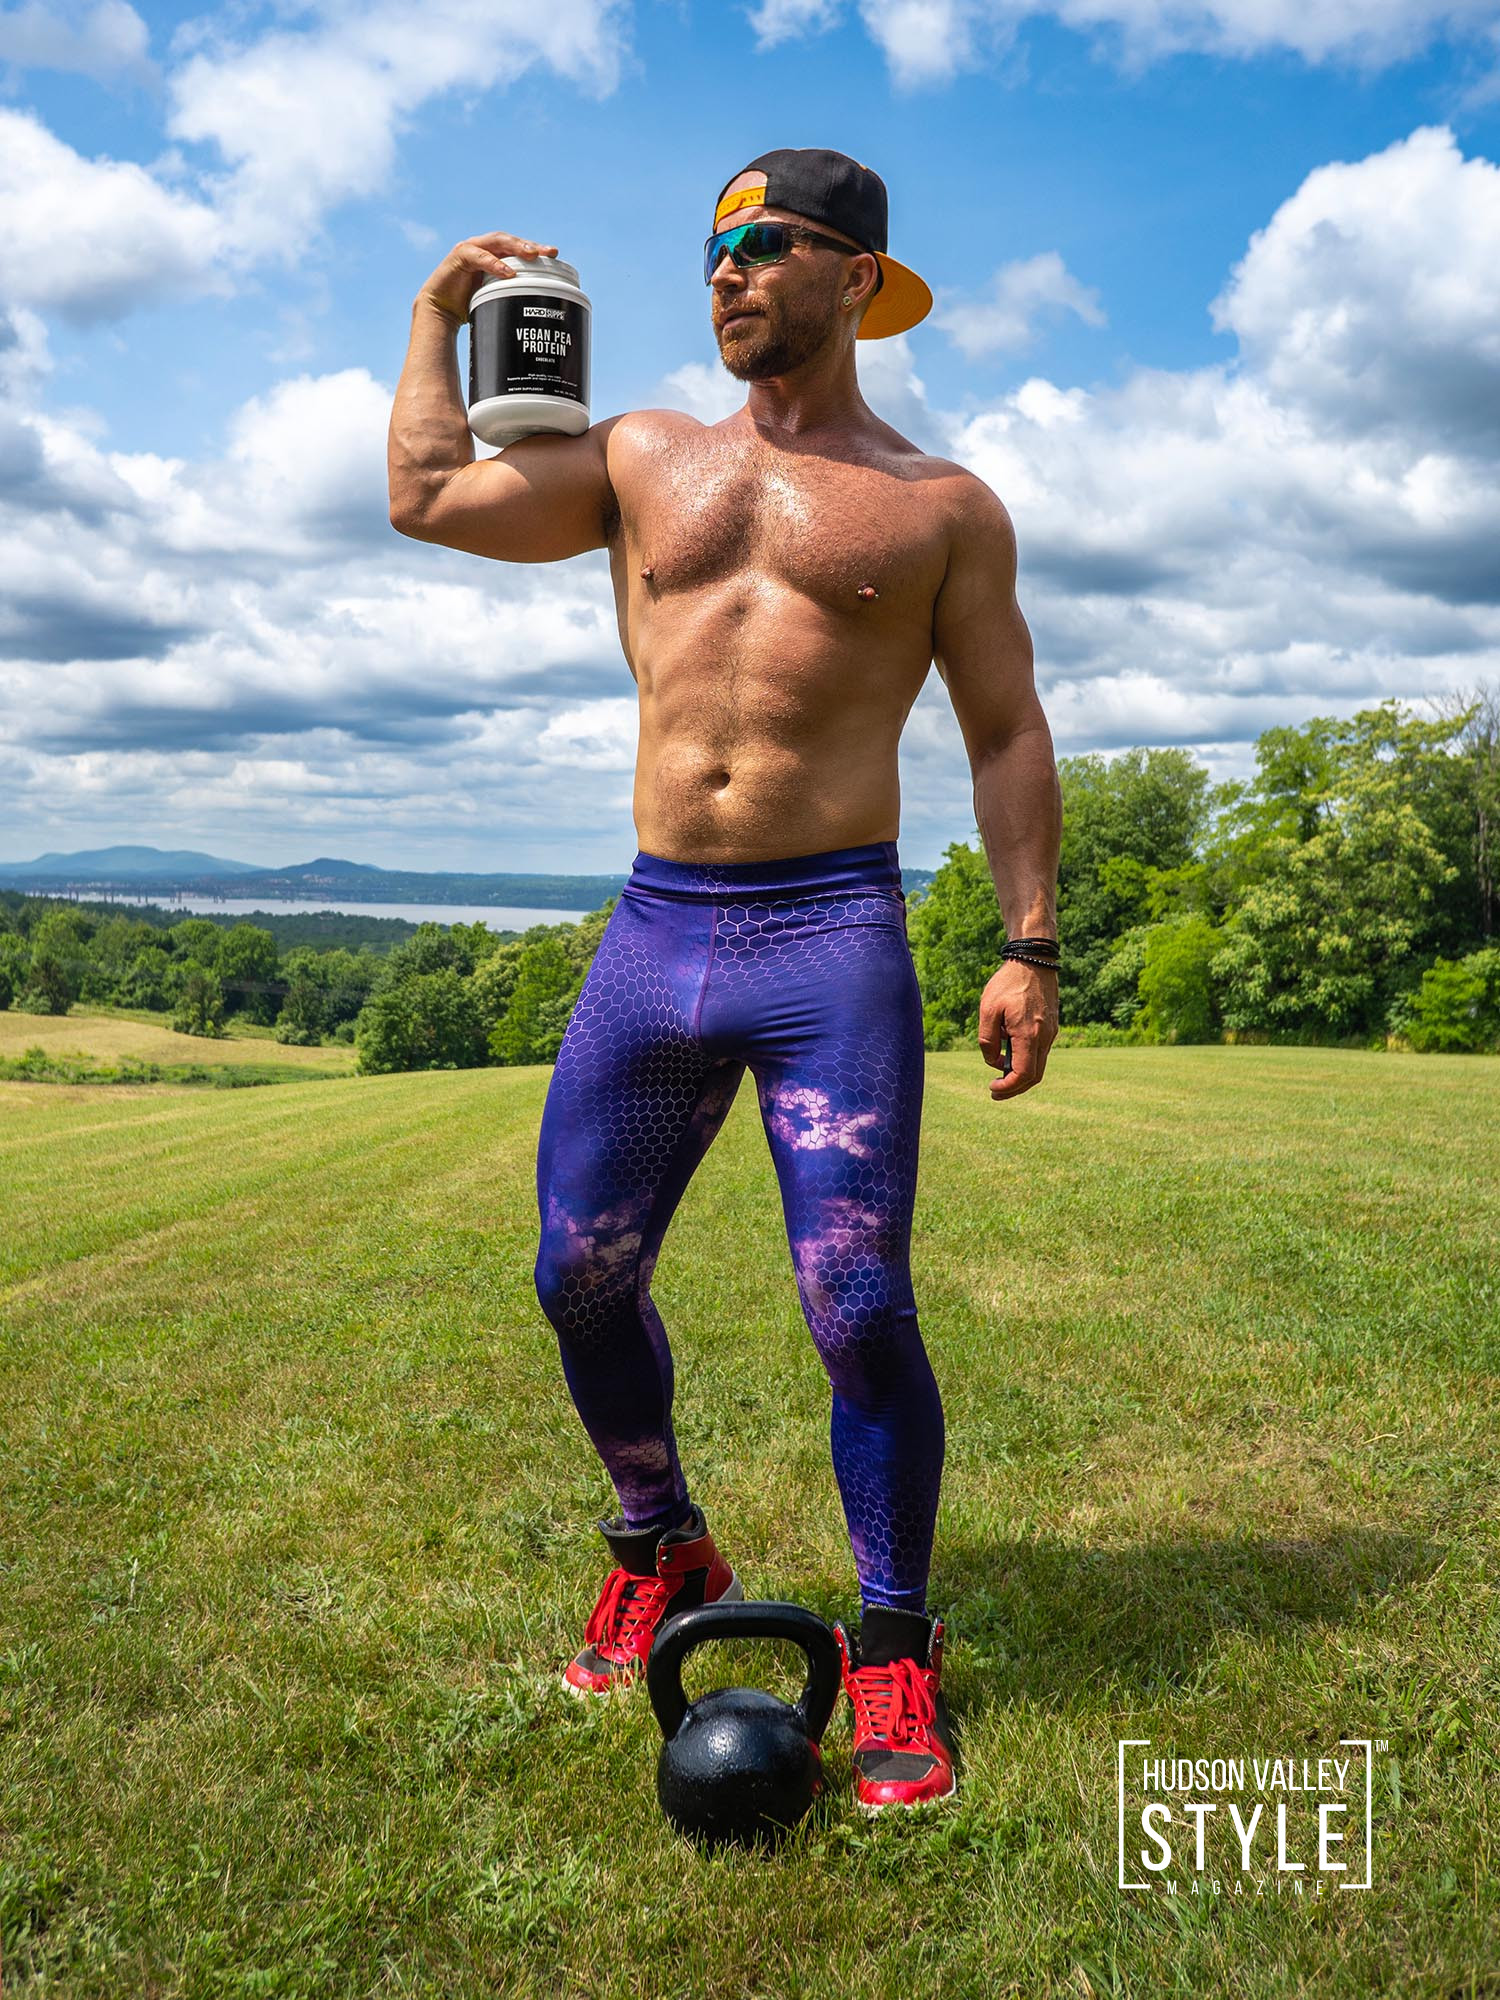 Harnessing the Power of Kettlebell Workouts for Enhanced Longevity – Bodybuilding 101 with Fitness Model + Bodybuilding Coach Maxwell Alexander – Presented by Vegan Pea Protein by HARD SUPPS